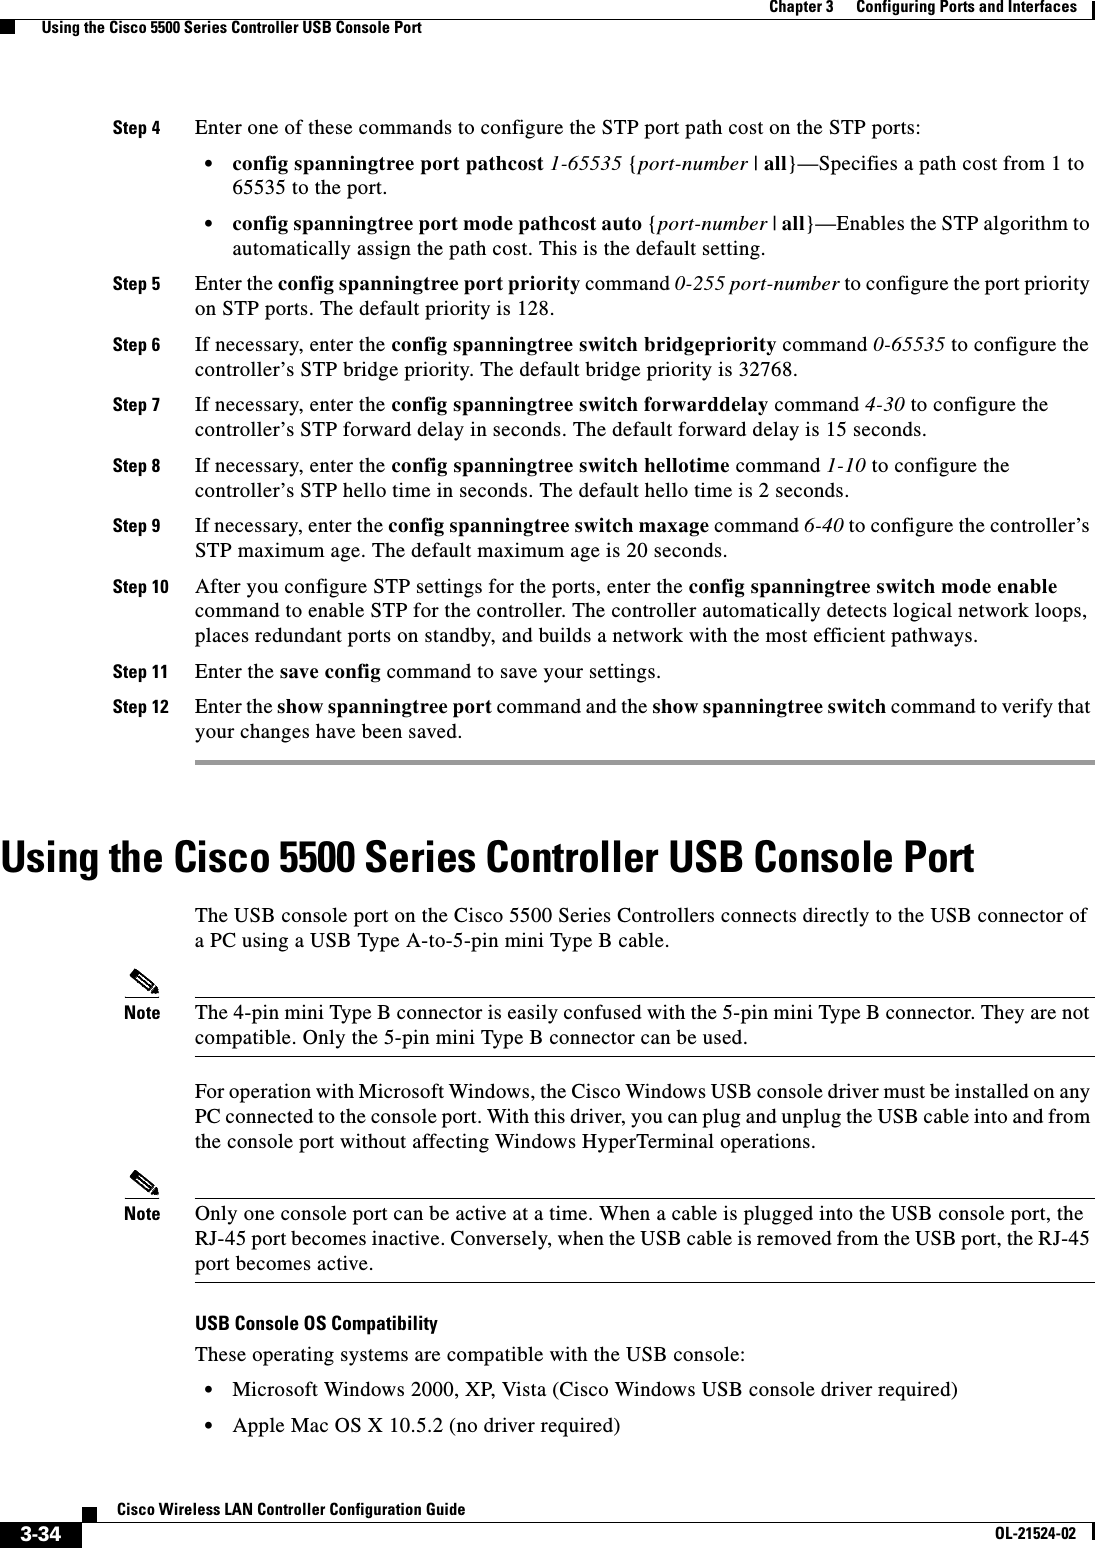  3-34Cisco Wireless LAN Controller Configuration GuideOL-21524-02Chapter 3      Configuring Ports and Interfaces  Using the Cisco 5500 Series Controller USB Console PortStep 4 Enter one of these commands to configure the STP port path cost on the STP ports:  • config spanningtree port pathcost 1-65535 {port-number | all}—Specifies a path cost from 1 to 65535 to the port.  • config spanningtree port mode pathcost auto {port-number | all}—Enables the STP algorithm to automatically assign the path cost. This is the default setting.Step 5 Enter the config spanningtree port priority command 0-255 port-number to configure the port priority on STP ports. The default priority is 128.Step 6 If necessary, enter the config spanningtree switch bridgepriority command 0-65535 to configure the controller’s STP bridge priority. The default bridge priority is 32768.Step 7 If necessary, enter the config spanningtree switch forwarddelay command 4-30 to configure the controller’s STP forward delay in seconds. The default forward delay is 15 seconds.Step 8 If necessary, enter the config spanningtree switch hellotime command 1-10 to configure the controller’s STP hello time in seconds. The default hello time is 2 seconds.Step 9 If necessary, enter the config spanningtree switch maxage command 6-40 to configure the controller’s STP maximum age. The default maximum age is 20 seconds.Step 10 After you configure STP settings for the ports, enter the config spanningtree switch mode enable command to enable STP for the controller. The controller automatically detects logical network loops, places redundant ports on standby, and builds a network with the most efficient pathways.Step 11 Enter the save config command to save your settings.Step 12 Enter the show spanningtree port command and the show spanningtree switch command to verify that your changes have been saved.Using the Cisco 5500 Series Controller USB Console PortThe USB console port on the Cisco 5500 Series Controllers connects directly to the USB connector of a PC using a USB Type A-to-5-pin mini Type B cable.Note The 4-pin mini Type B connector is easily confused with the 5-pin mini Type B connector. They are not compatible. Only the 5-pin mini Type B connector can be used.For operation with Microsoft Windows, the Cisco Windows USB console driver must be installed on any PC connected to the console port. With this driver, you can plug and unplug the USB cable into and from the console port without affecting Windows HyperTerminal operations. Note Only one console port can be active at a time. When a cable is plugged into the USB console port, the RJ-45 port becomes inactive. Conversely, when the USB cable is removed from the USB port, the RJ-45 port becomes active.USB Console OS CompatibilityThese operating systems are compatible with the USB console:  • Microsoft Windows 2000, XP, Vista (Cisco Windows USB console driver required)  • Apple Mac OS X 10.5.2 (no driver required)